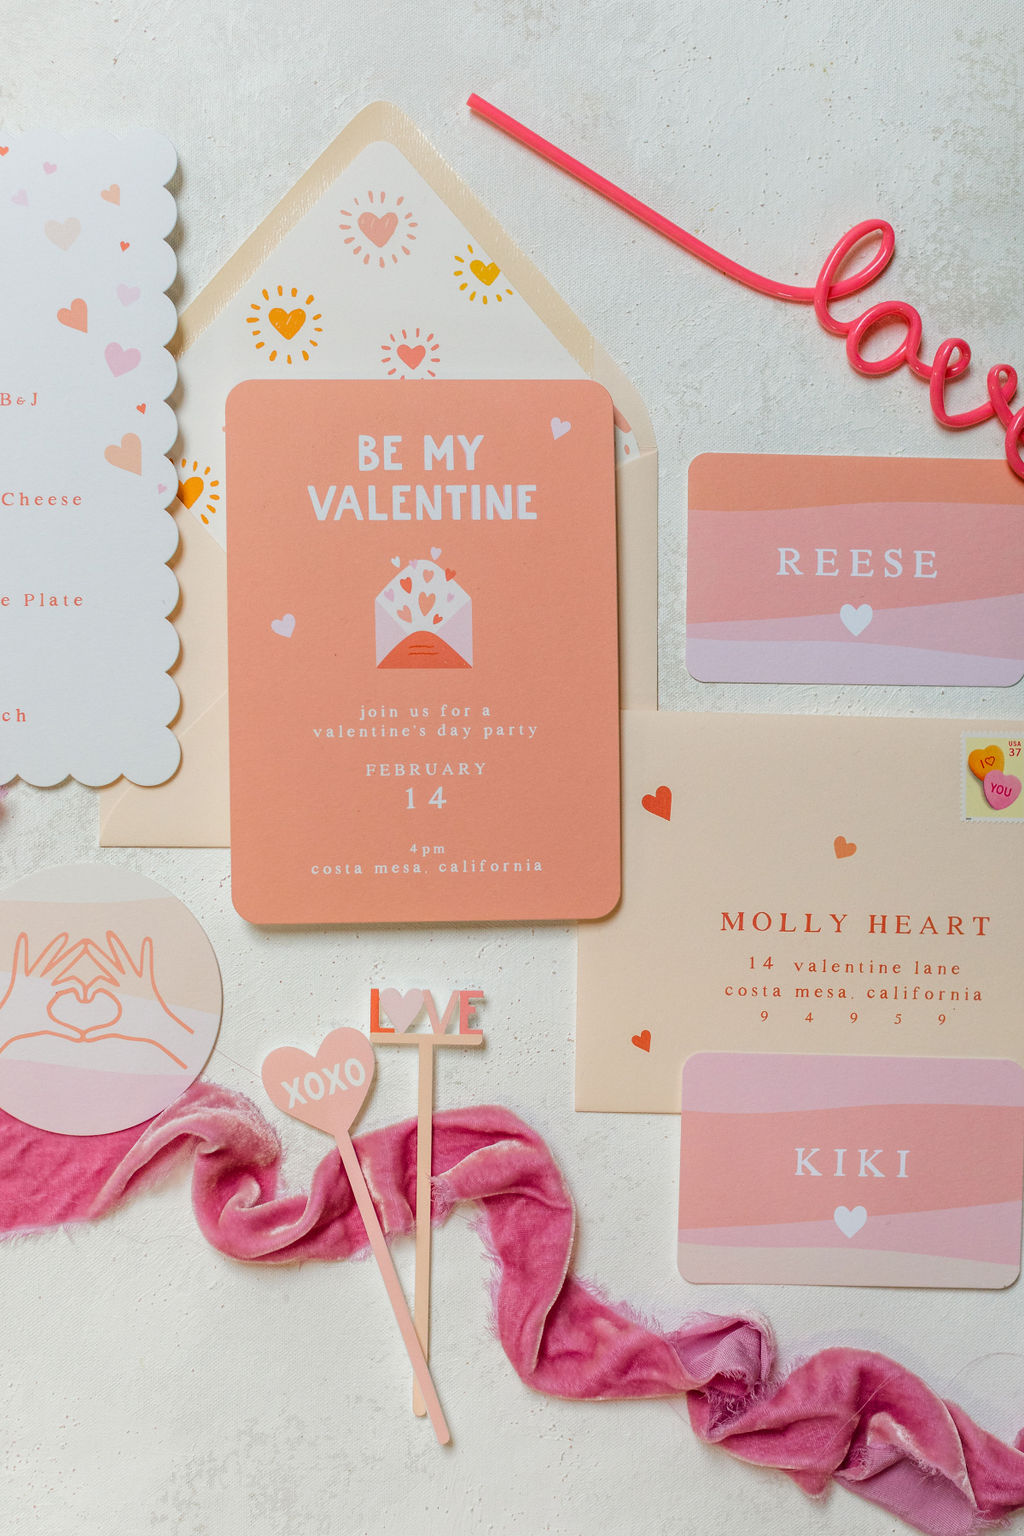 A Peachy Keen Valentine's Day for all the Little Babes • Beijos Events